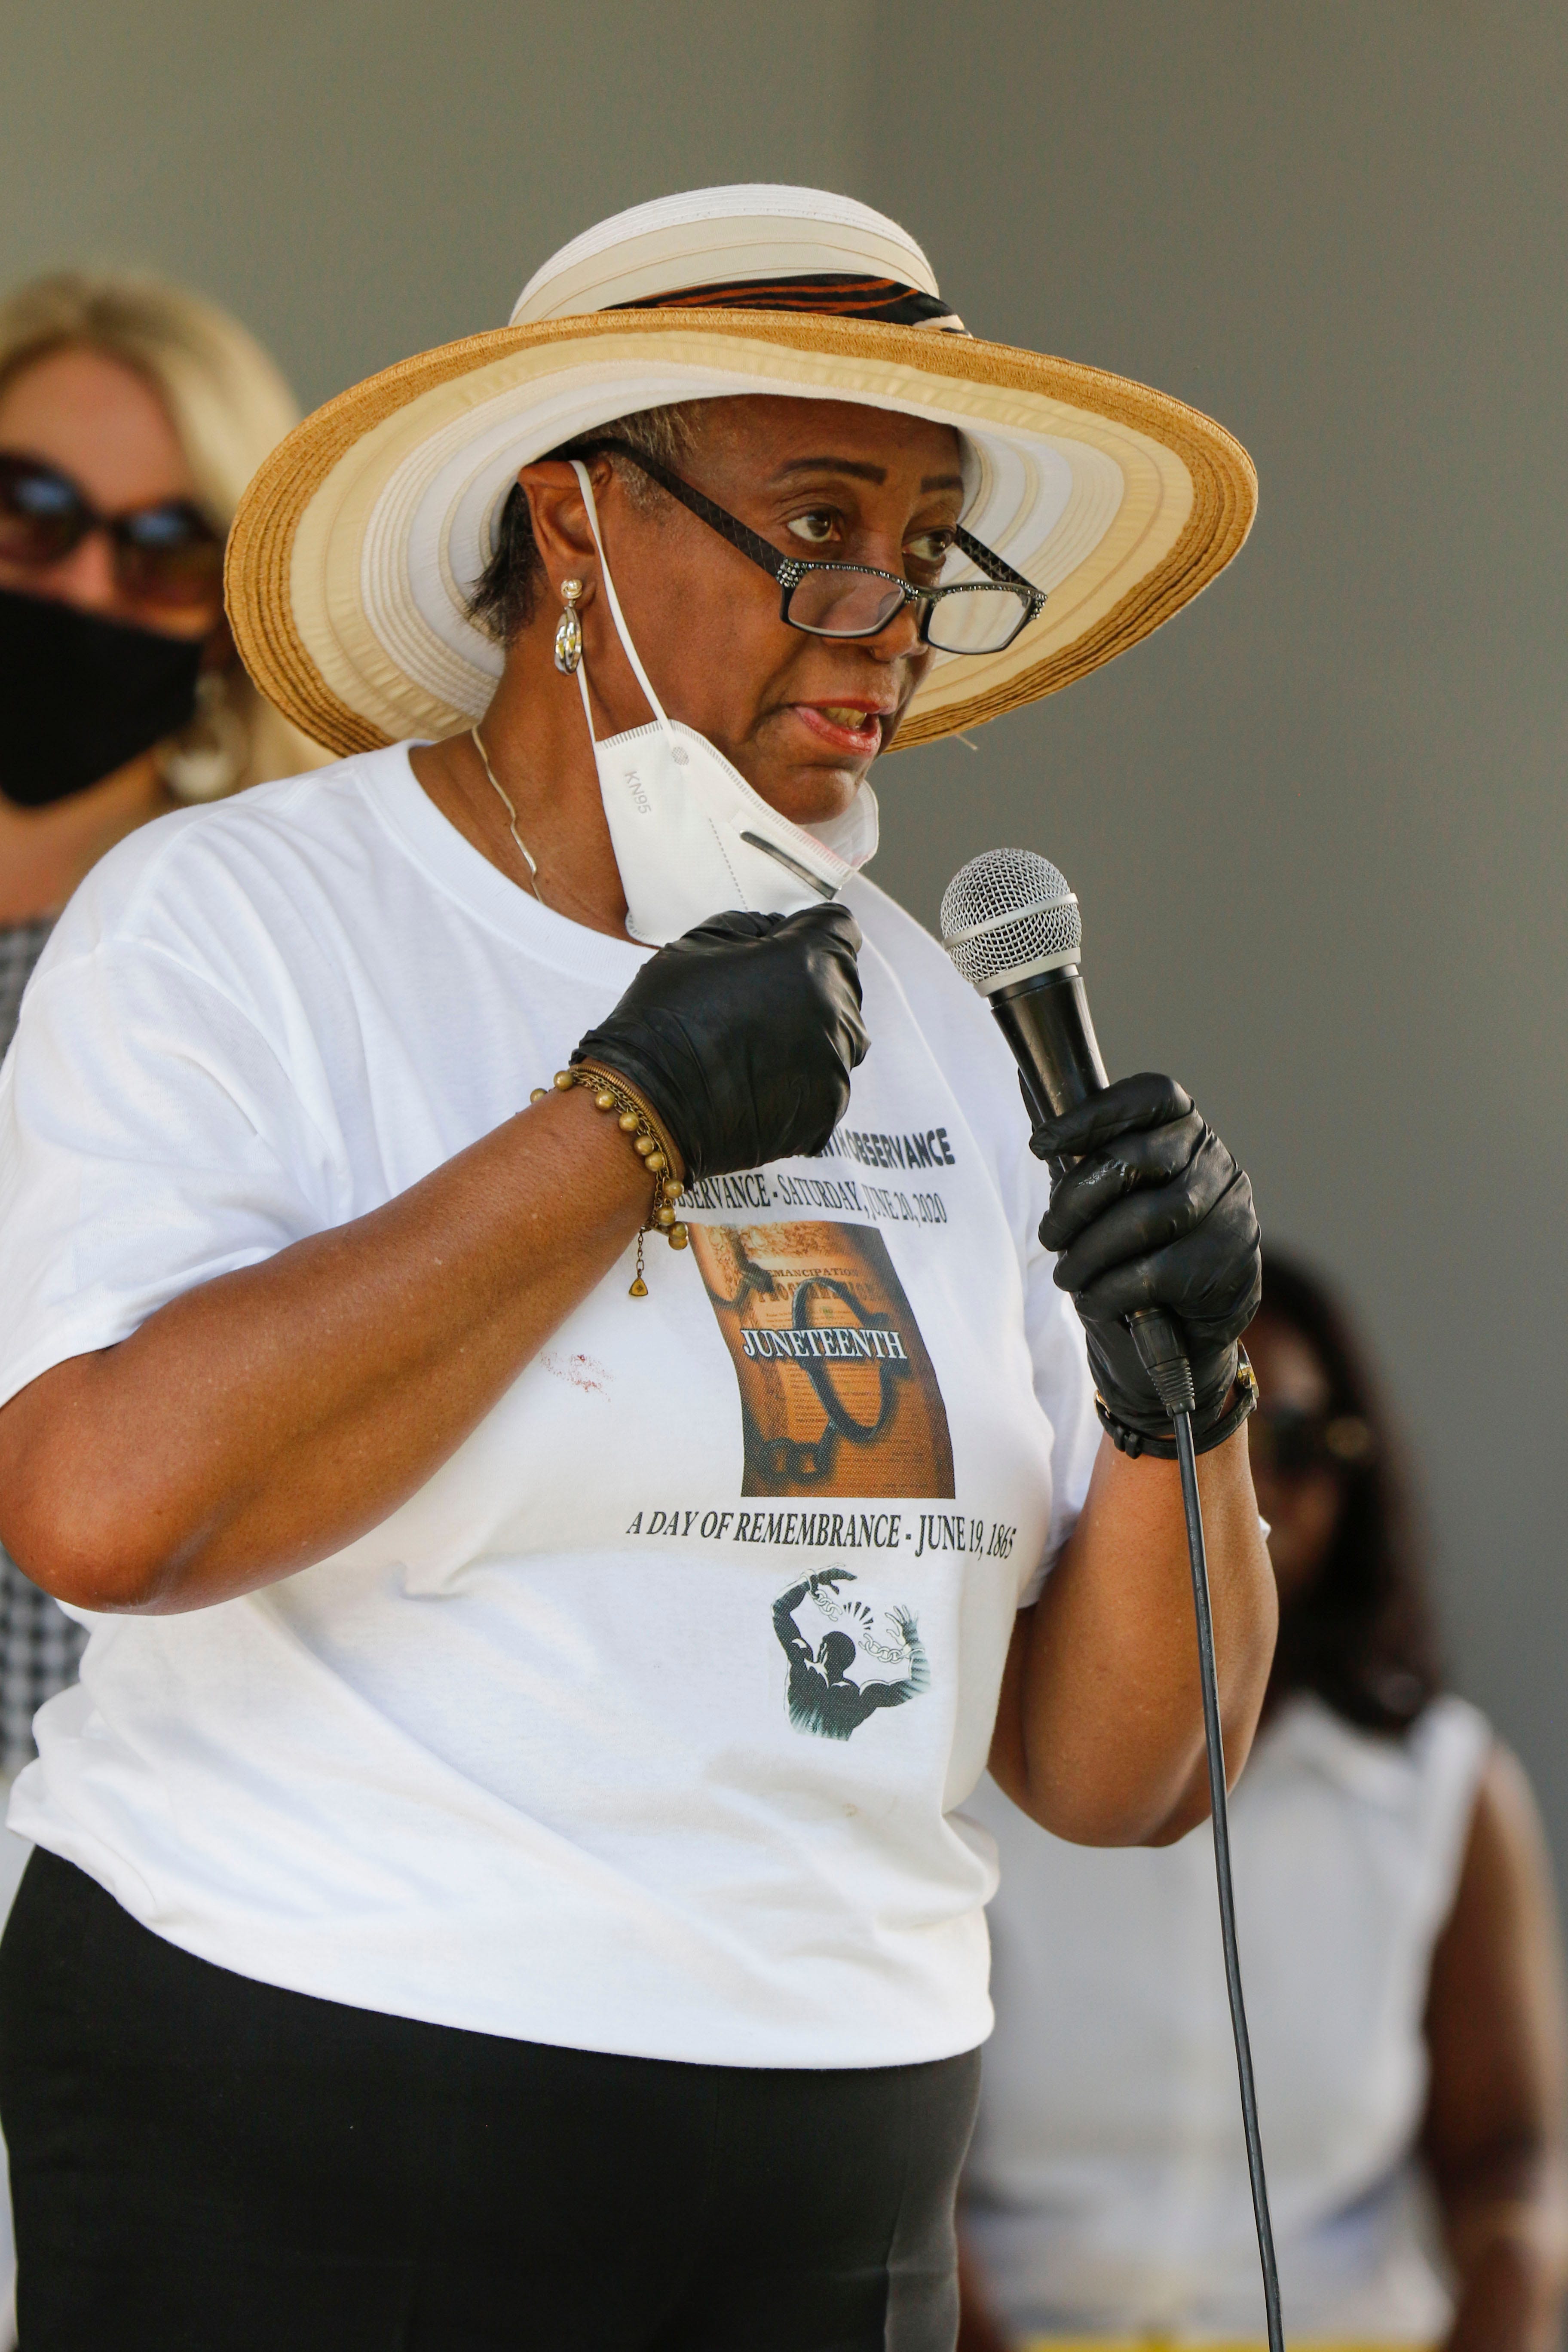 Doris Moore Bailey says a few parting words at the end of the Juneteenth celebration at Munn Park in Lakeland on June 20.